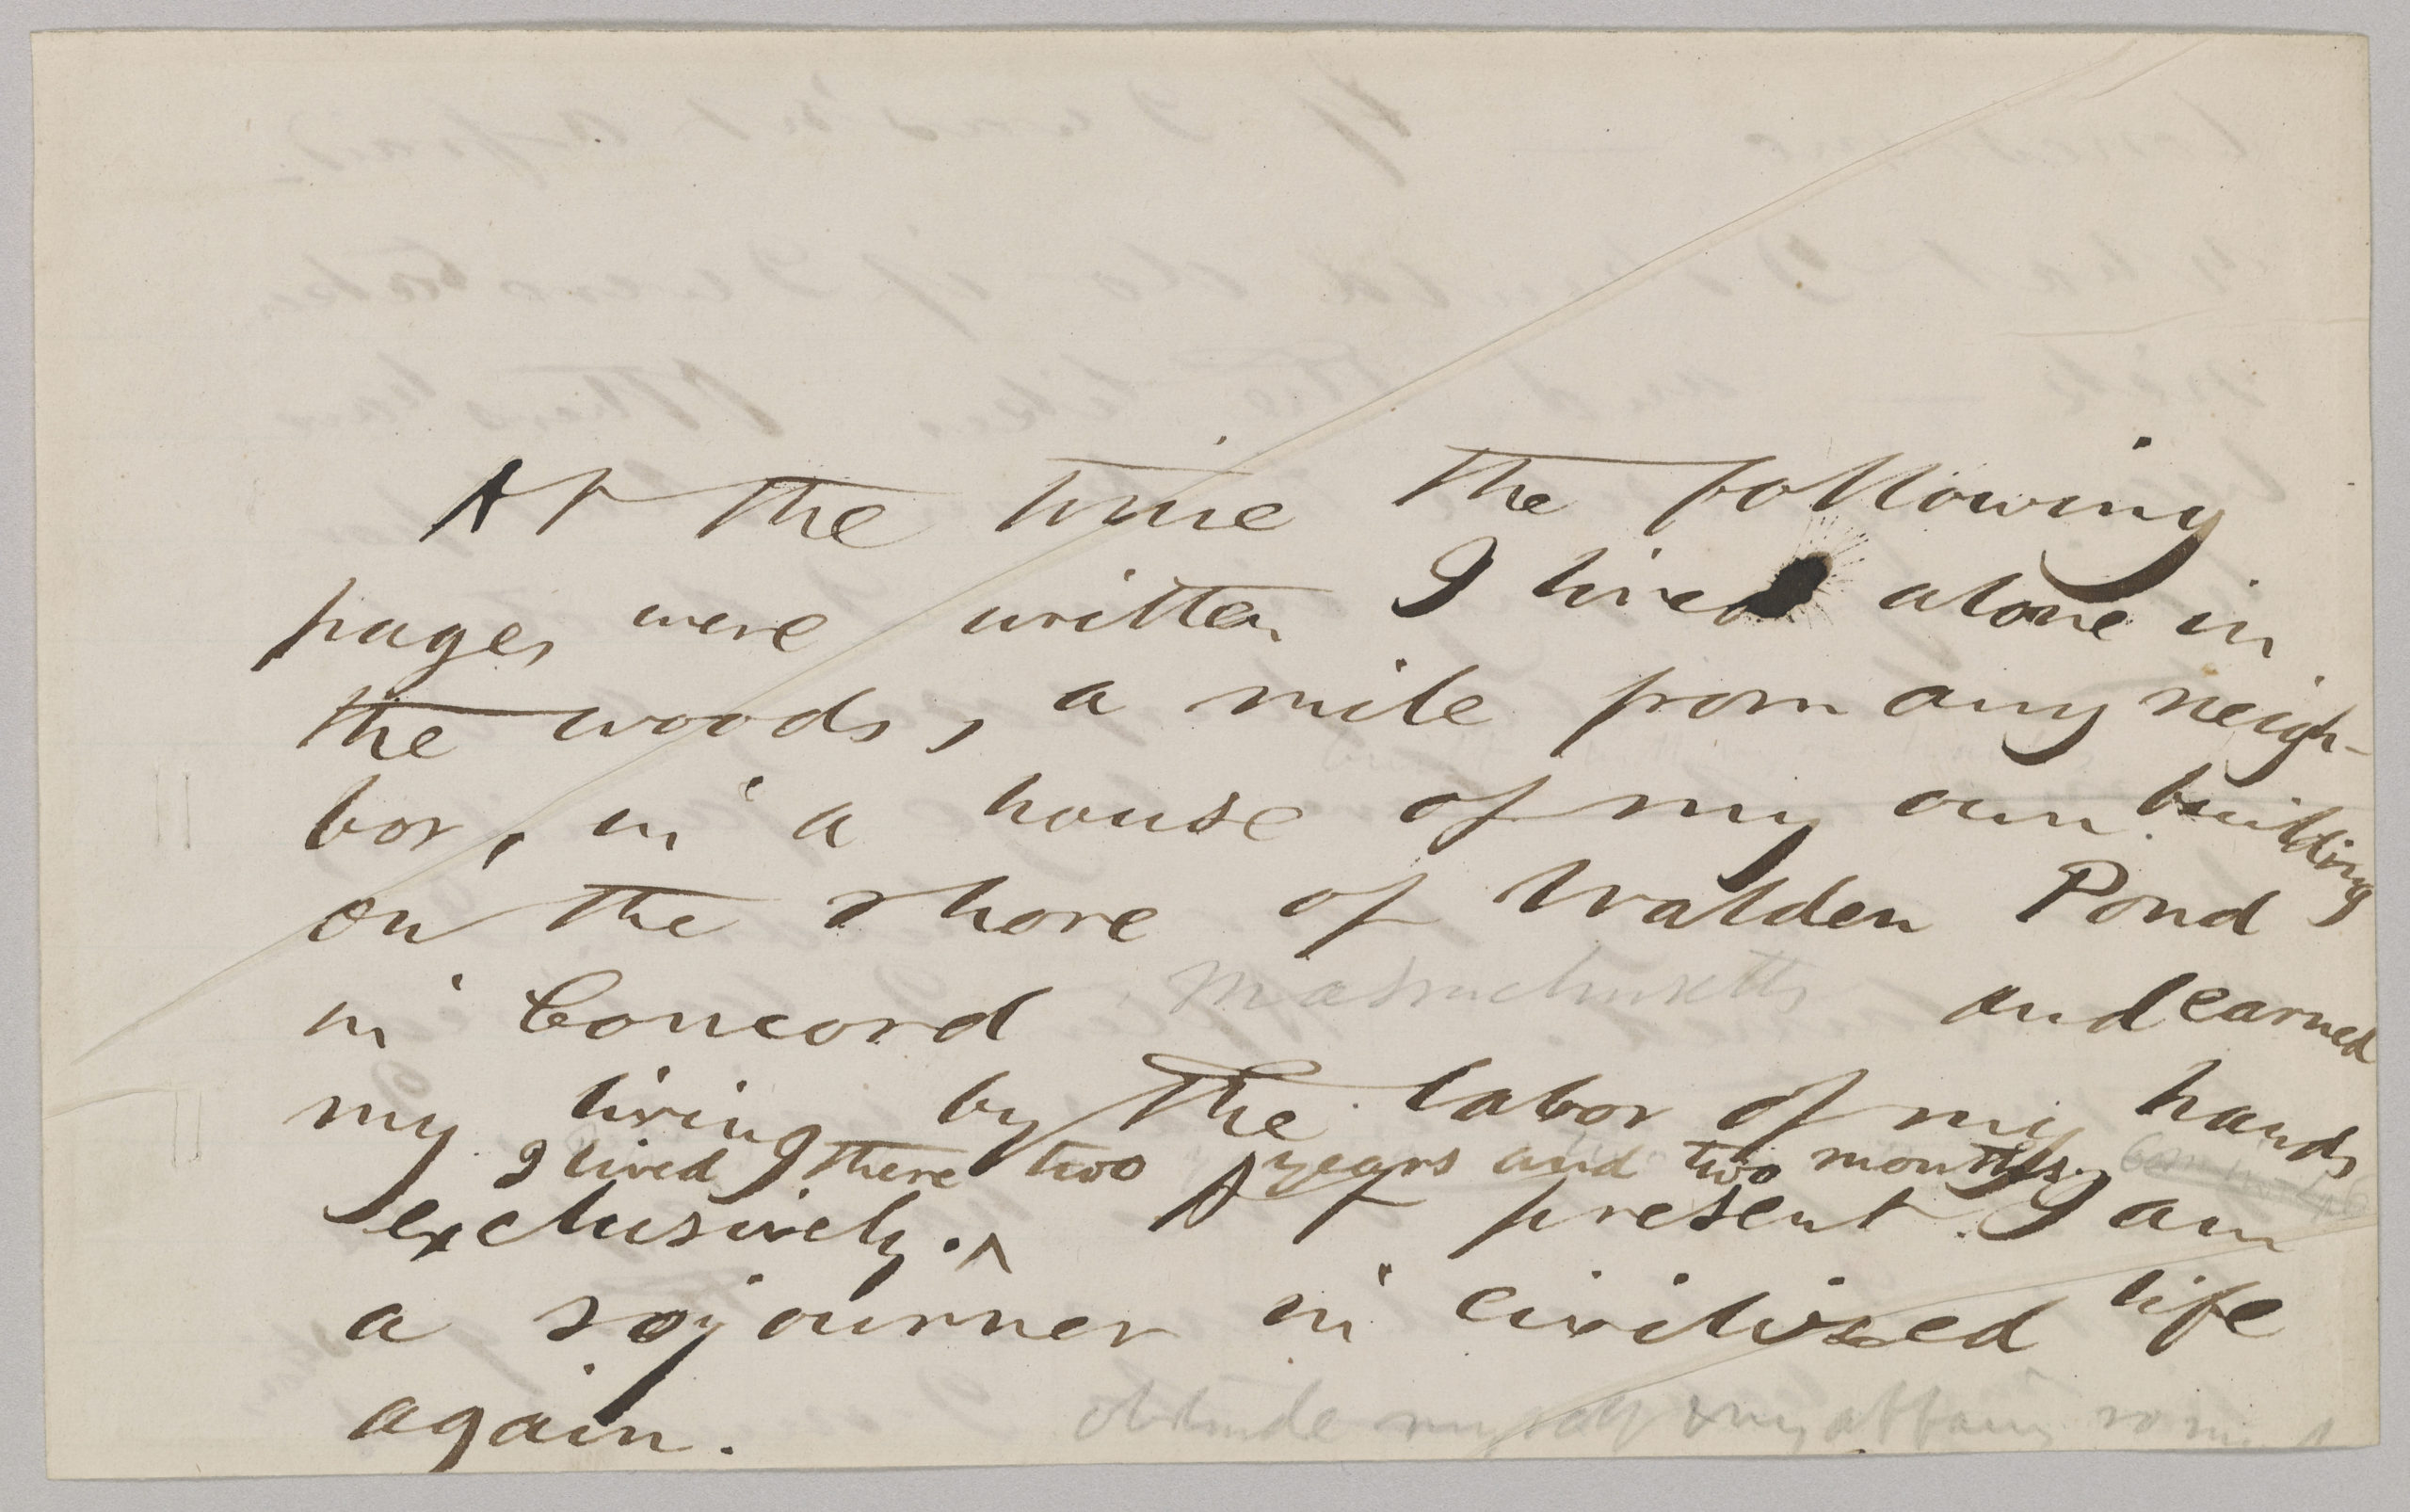 Thoreau’s Journal: “a field in which it was possible to labor & to think”